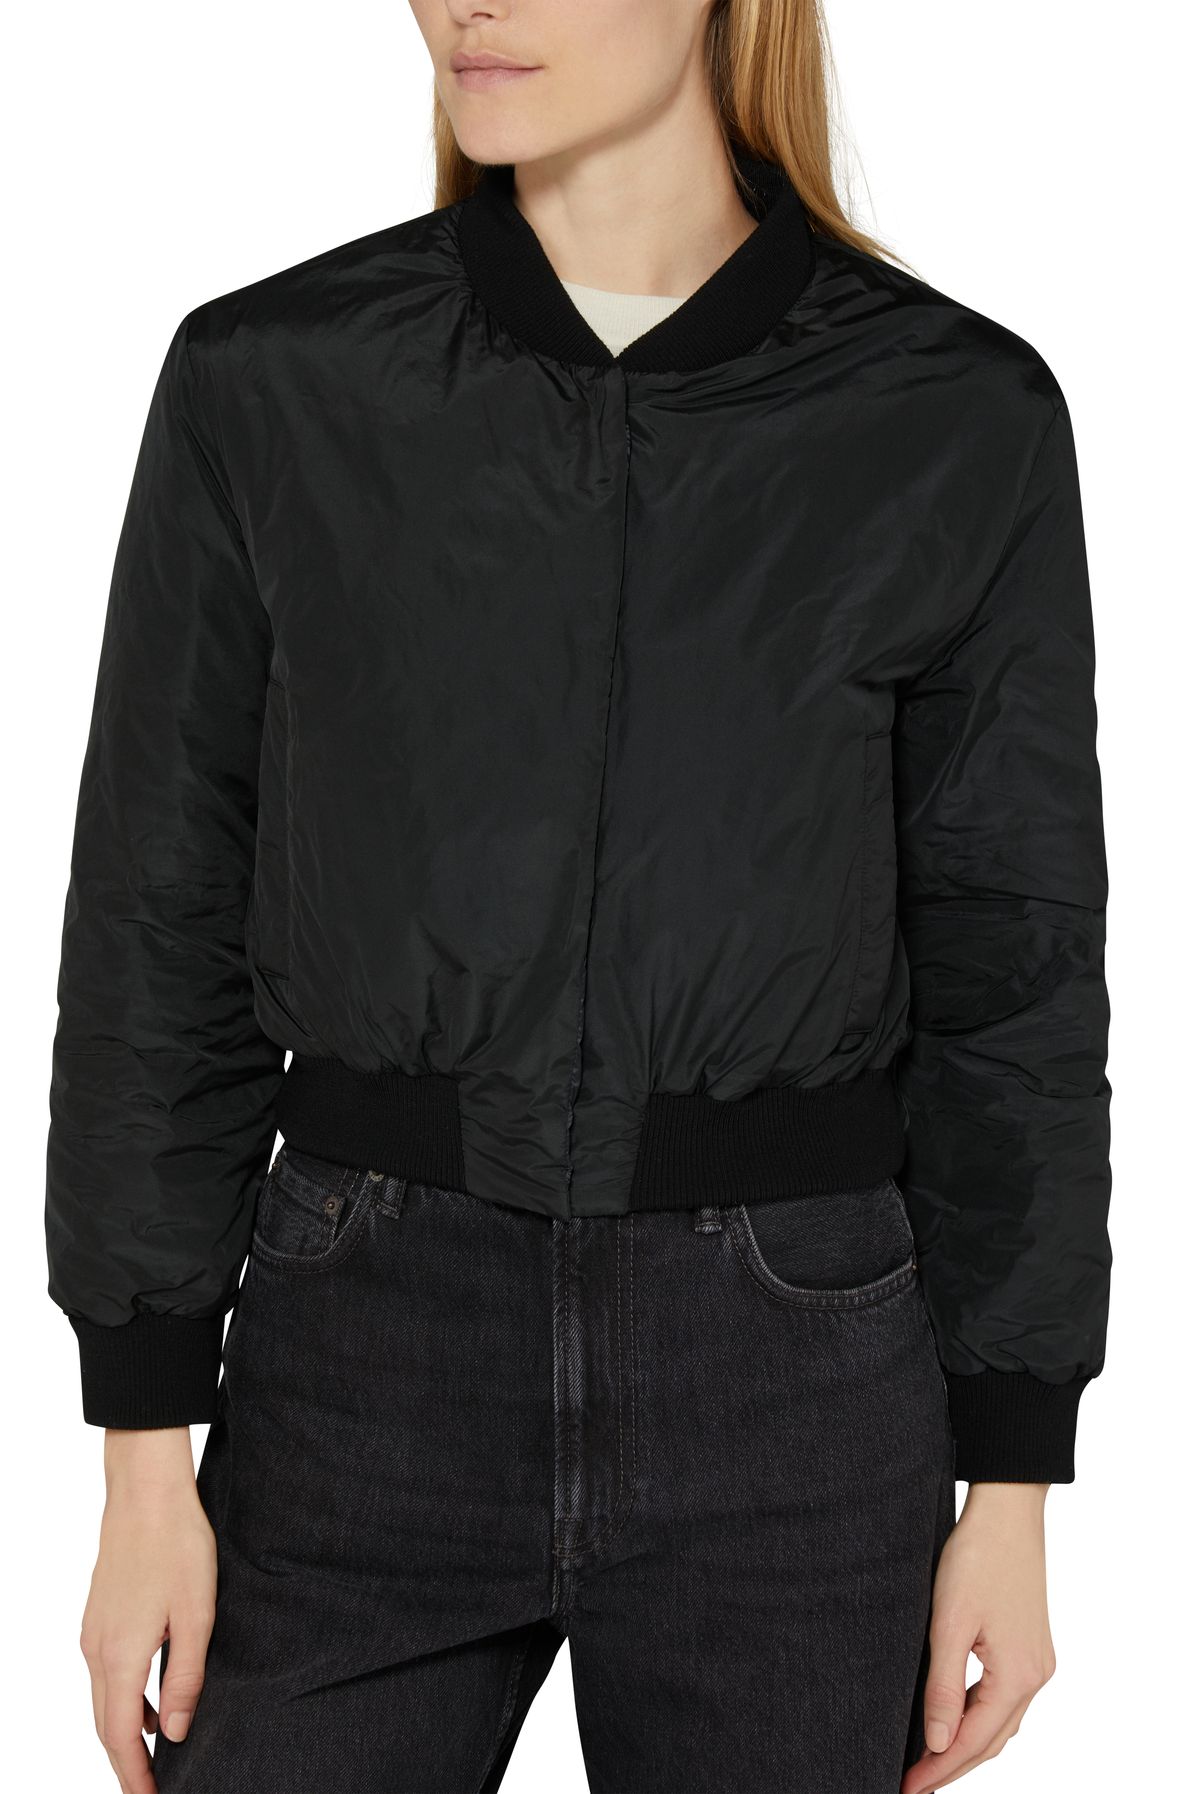 Max Mara Bsoft quilted jacket - THE CUBE